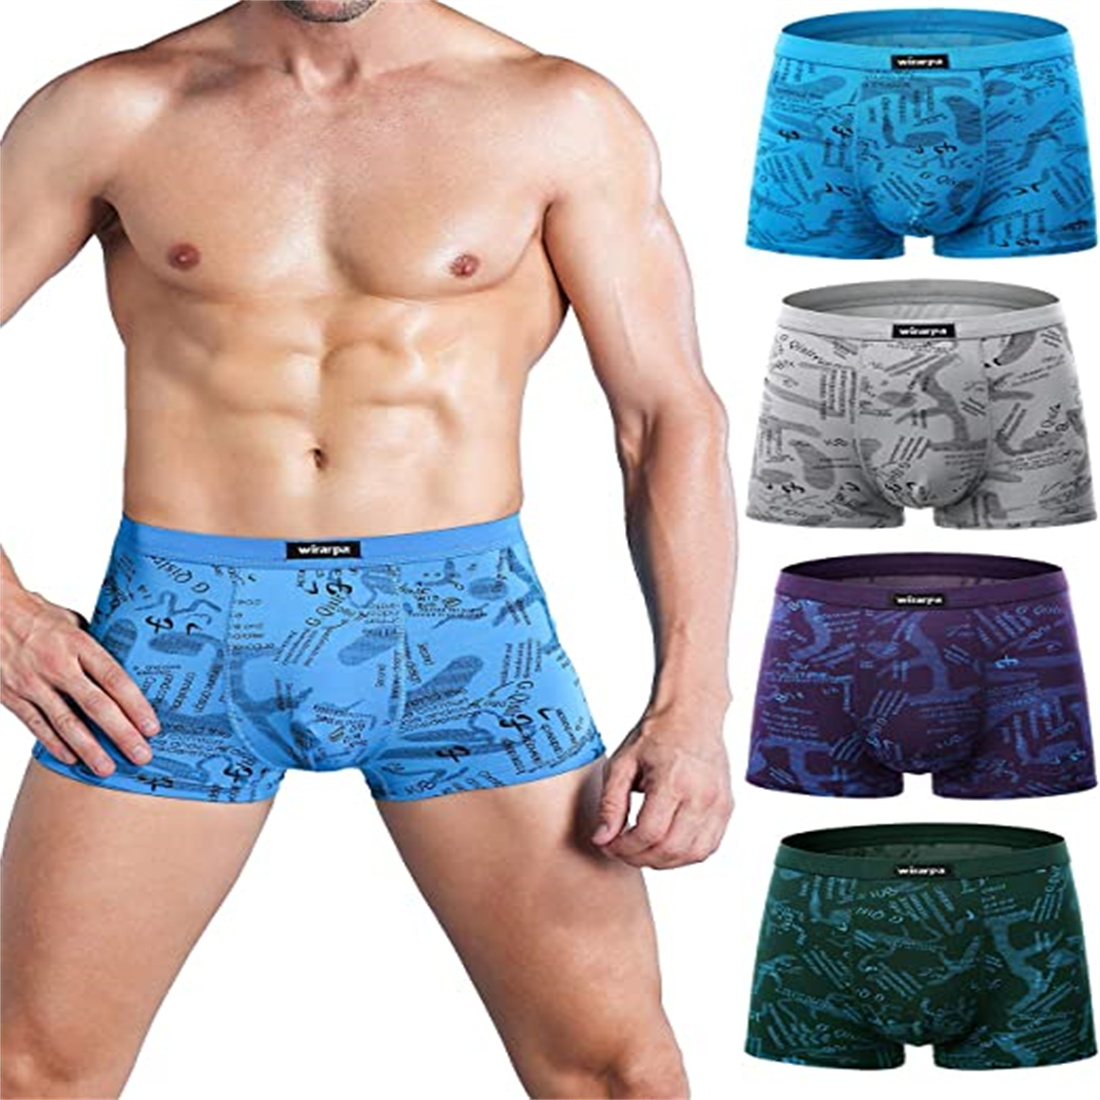 

Men's Underpants Breathable Modal Microfiber Trunks Underwear Covered Band Multipack